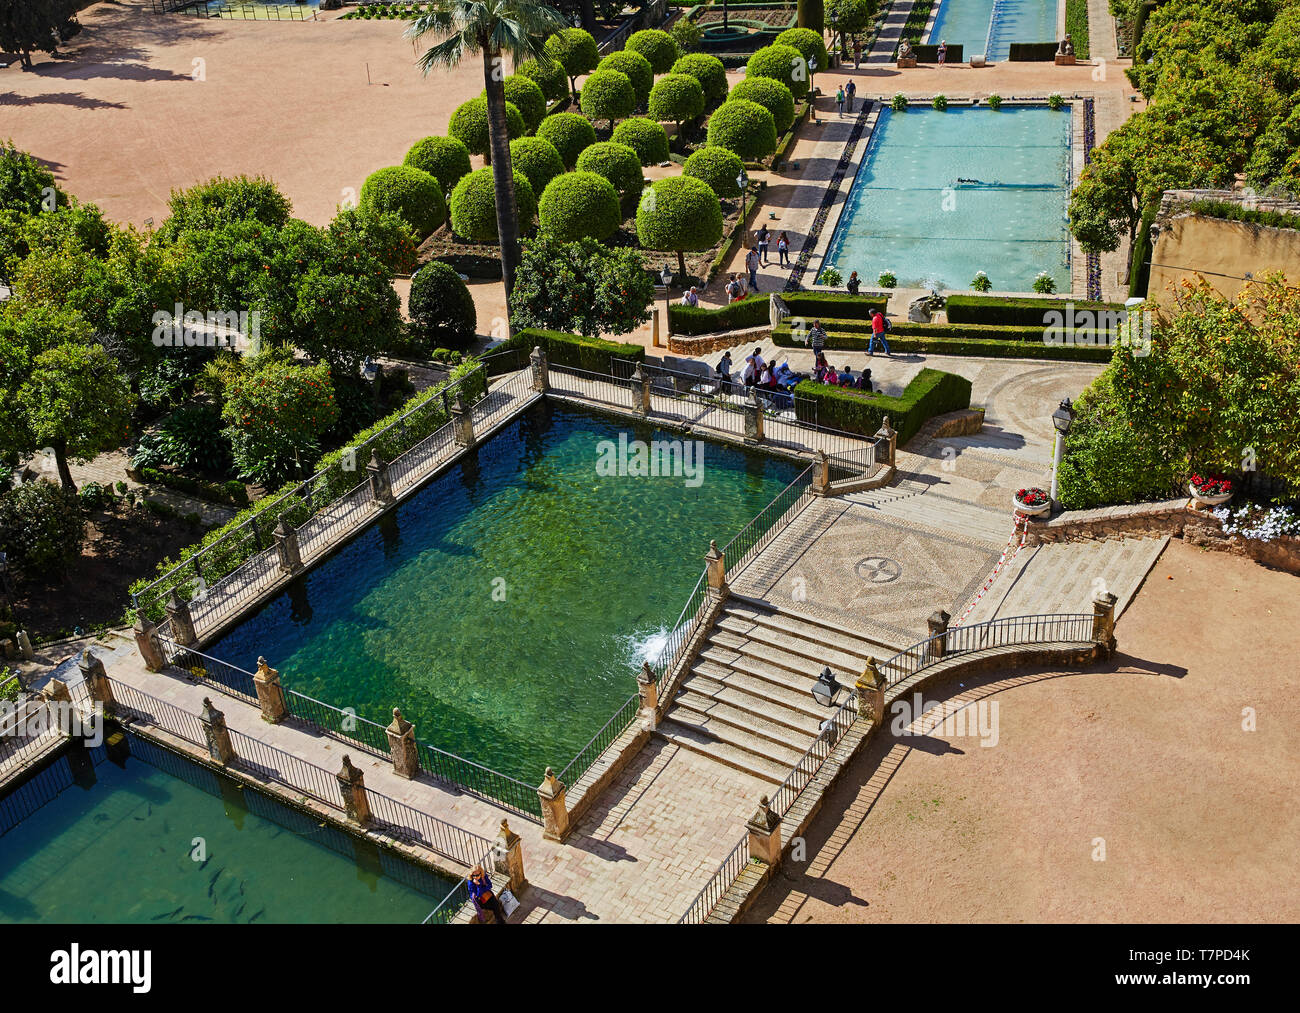 Elevated view of the pools and gardens of 'Alcazar de los Reyes Cristianos' in Cordoba Stock Photo